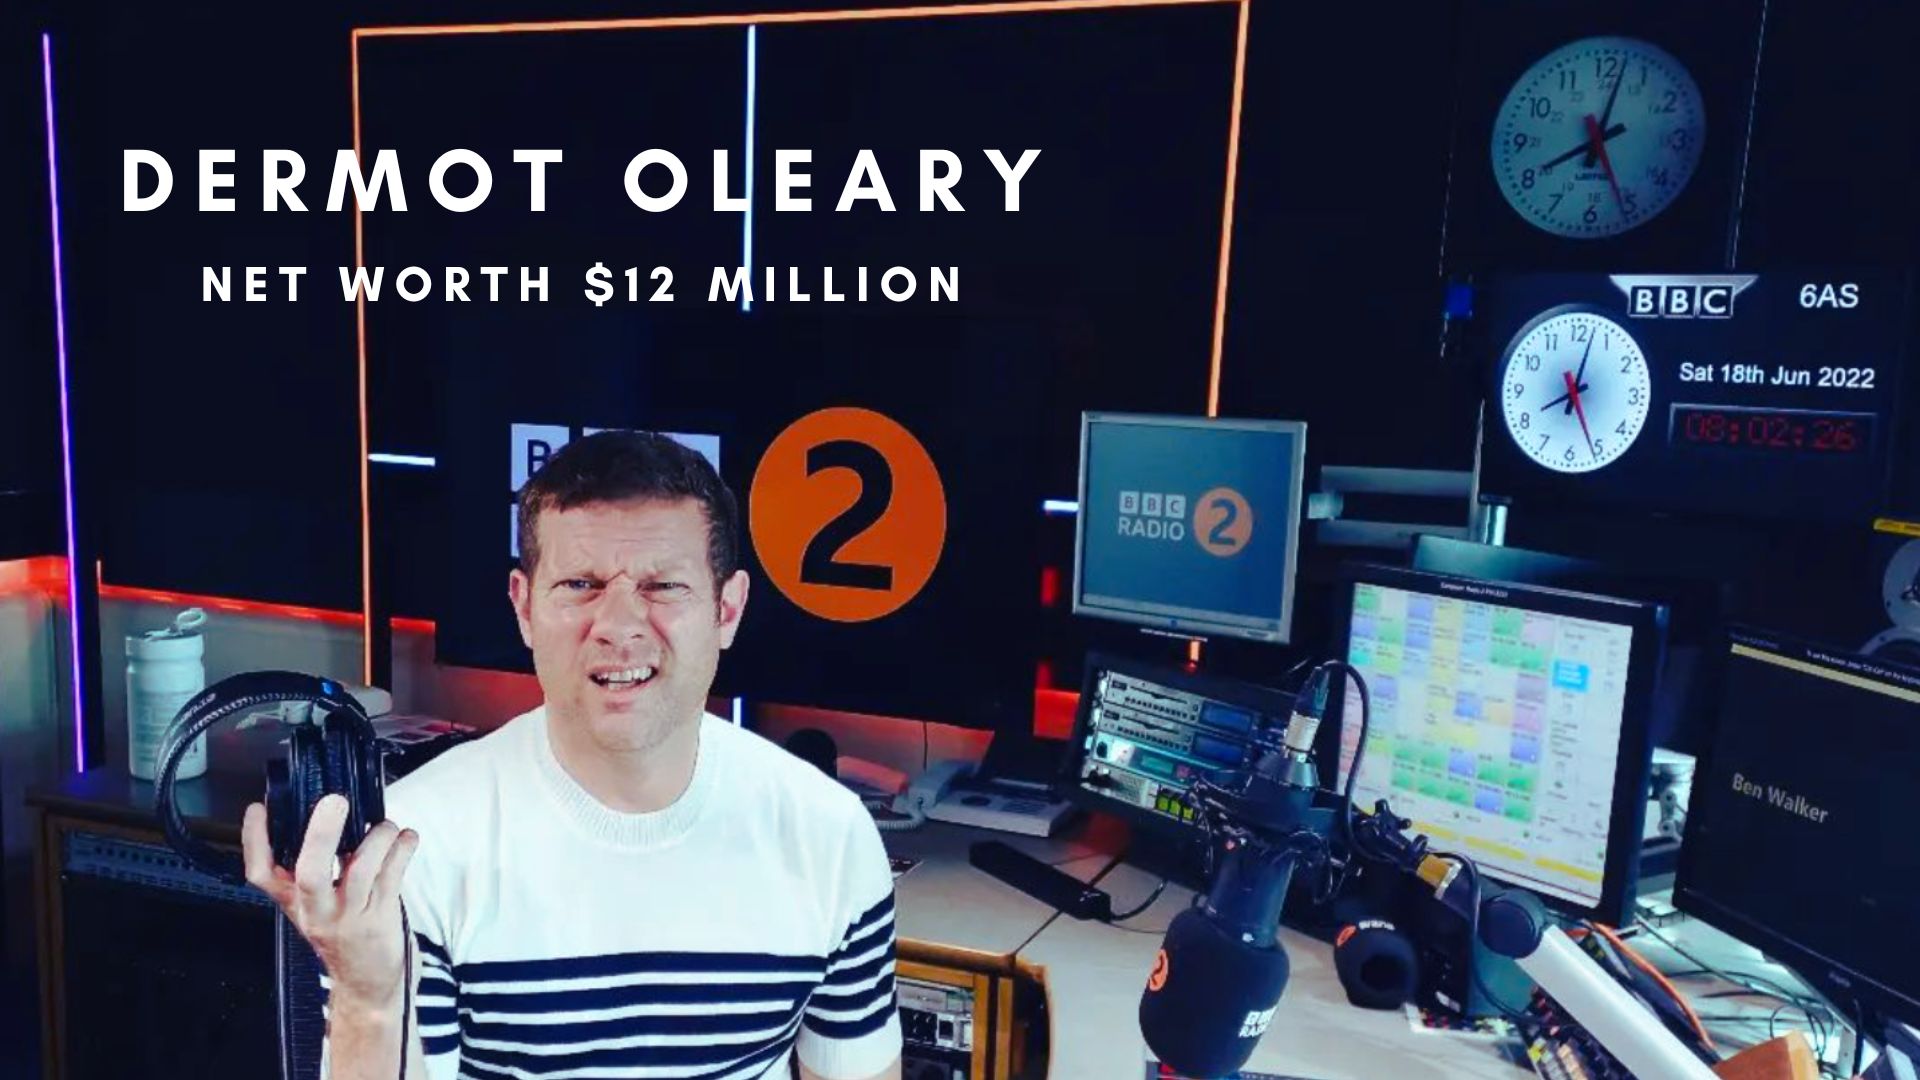 Dermot OLeary is an English broadcaster who currently works for ITV and BBC Radio 2. (Credits: @dermotoleary Instagram)